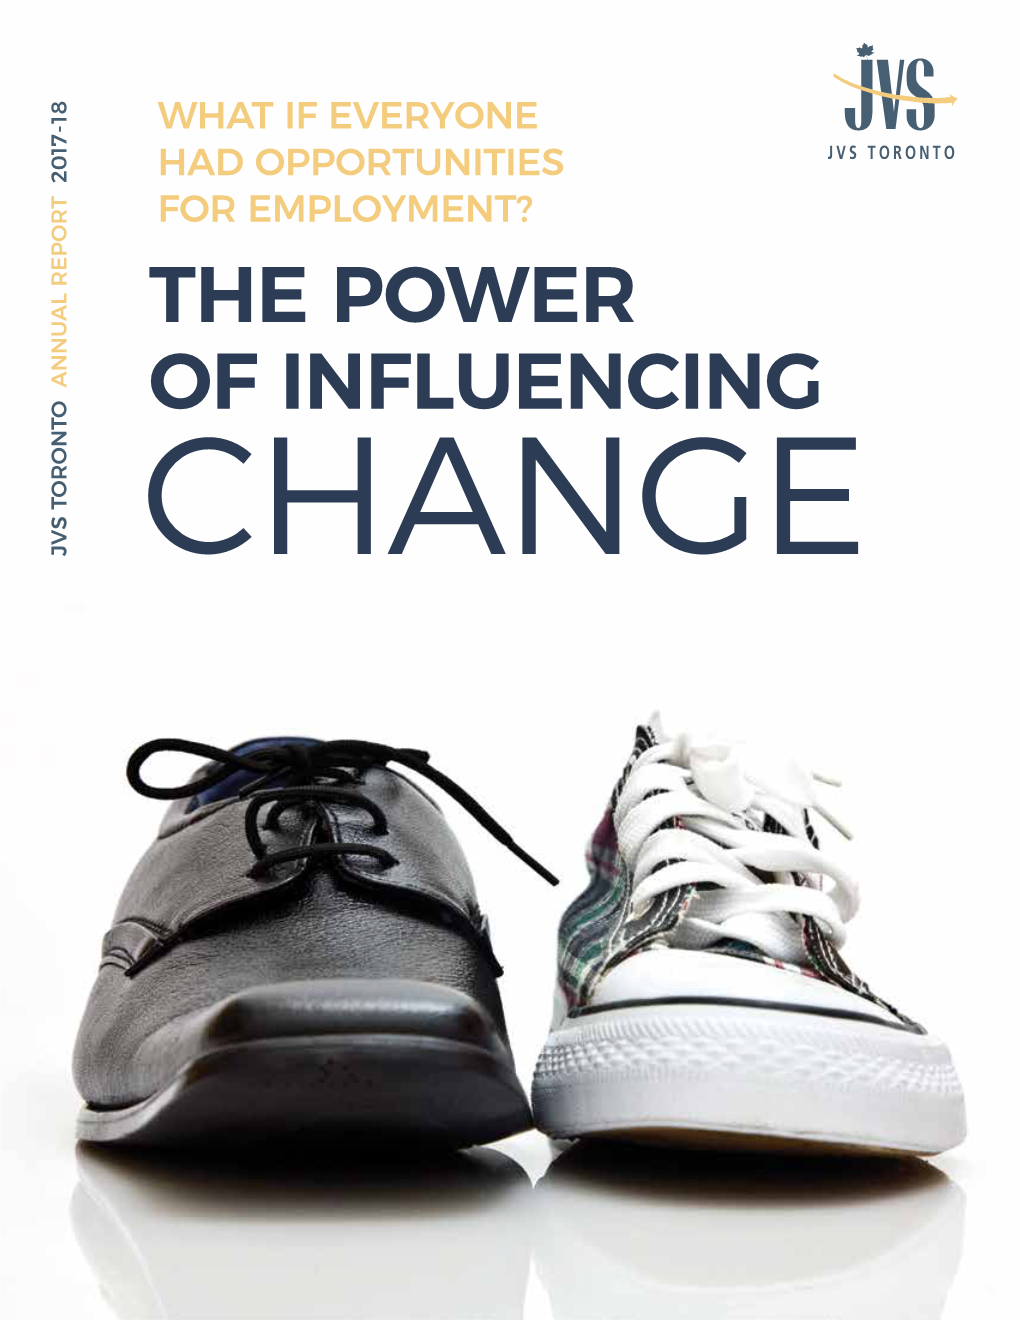 The Power of Influencing